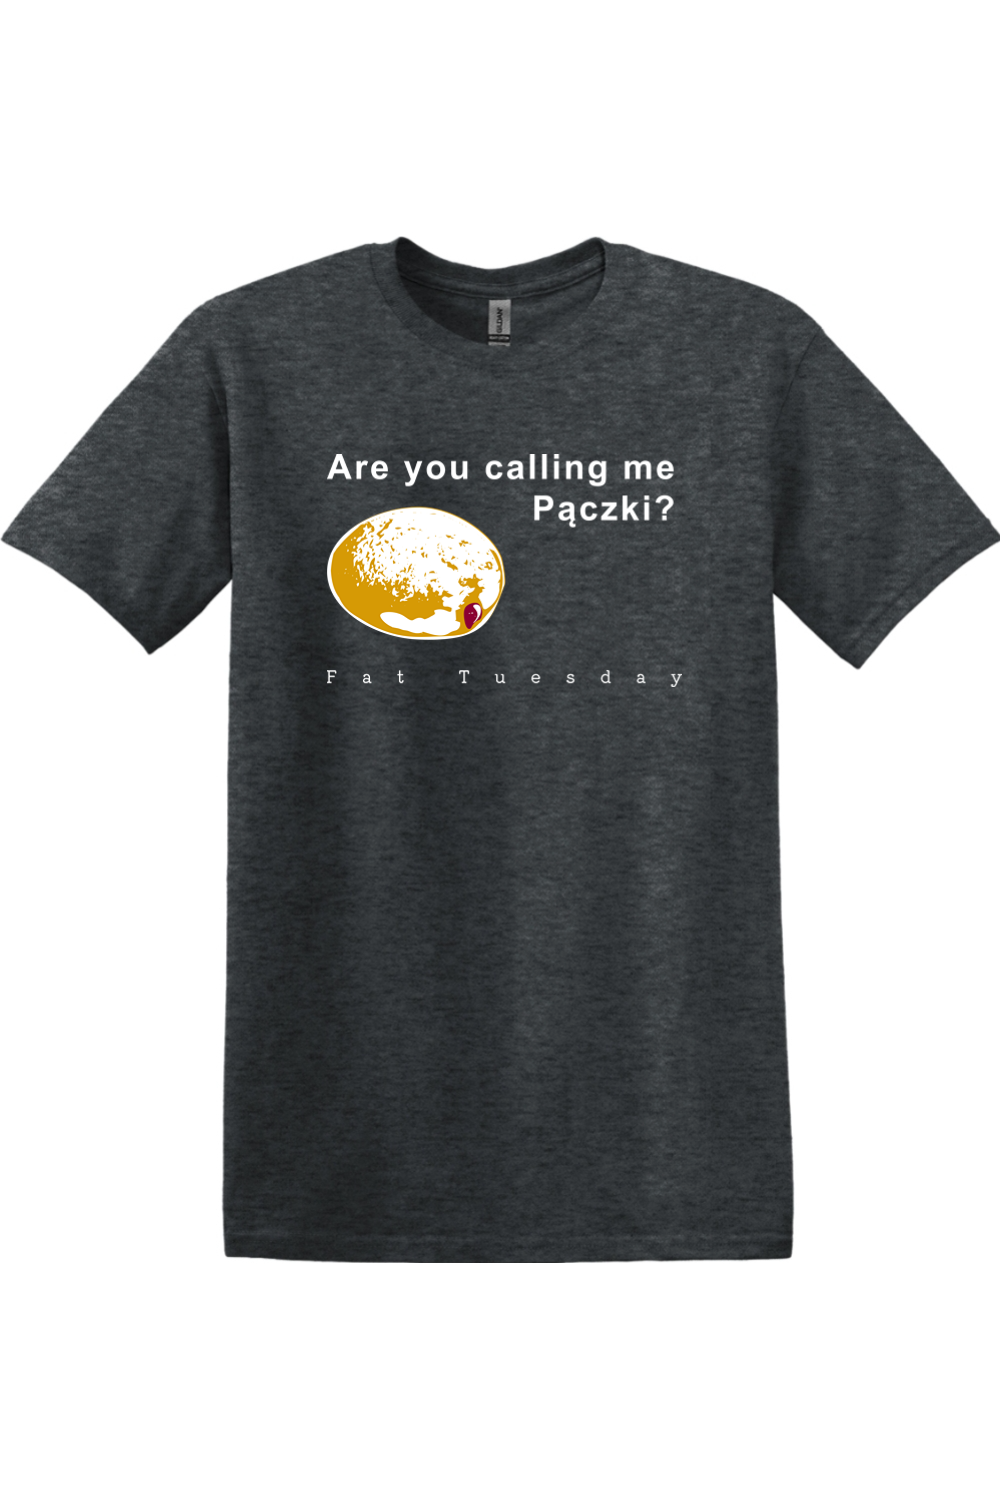 Are you calling me Pączki? Adult T-Shirt